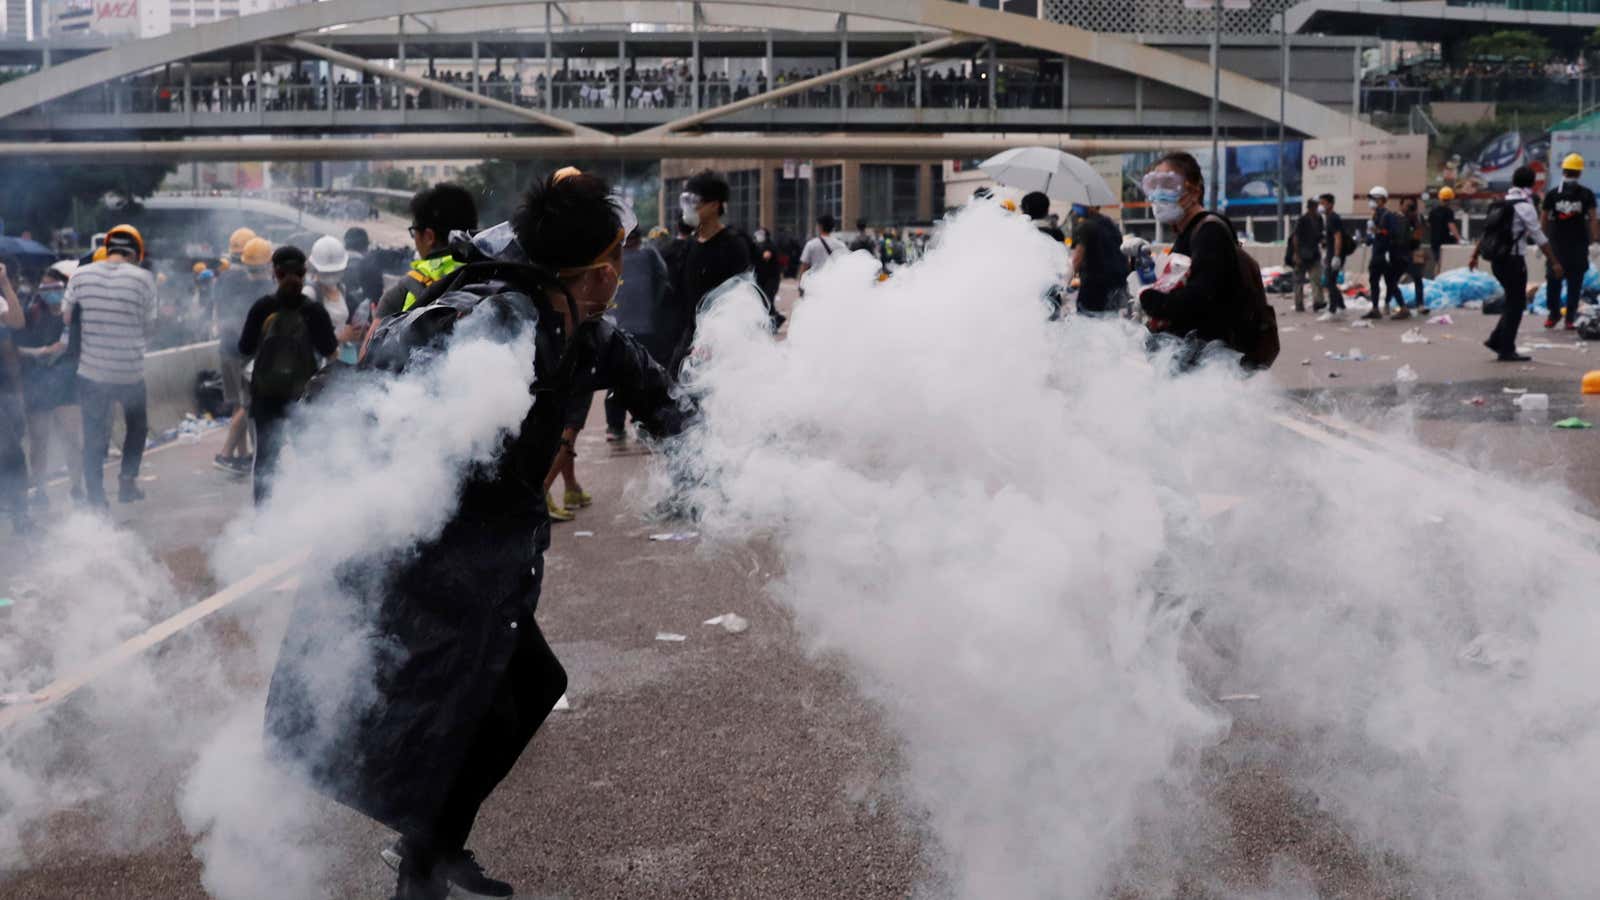 Big clashes in the heart of Hong Kong.